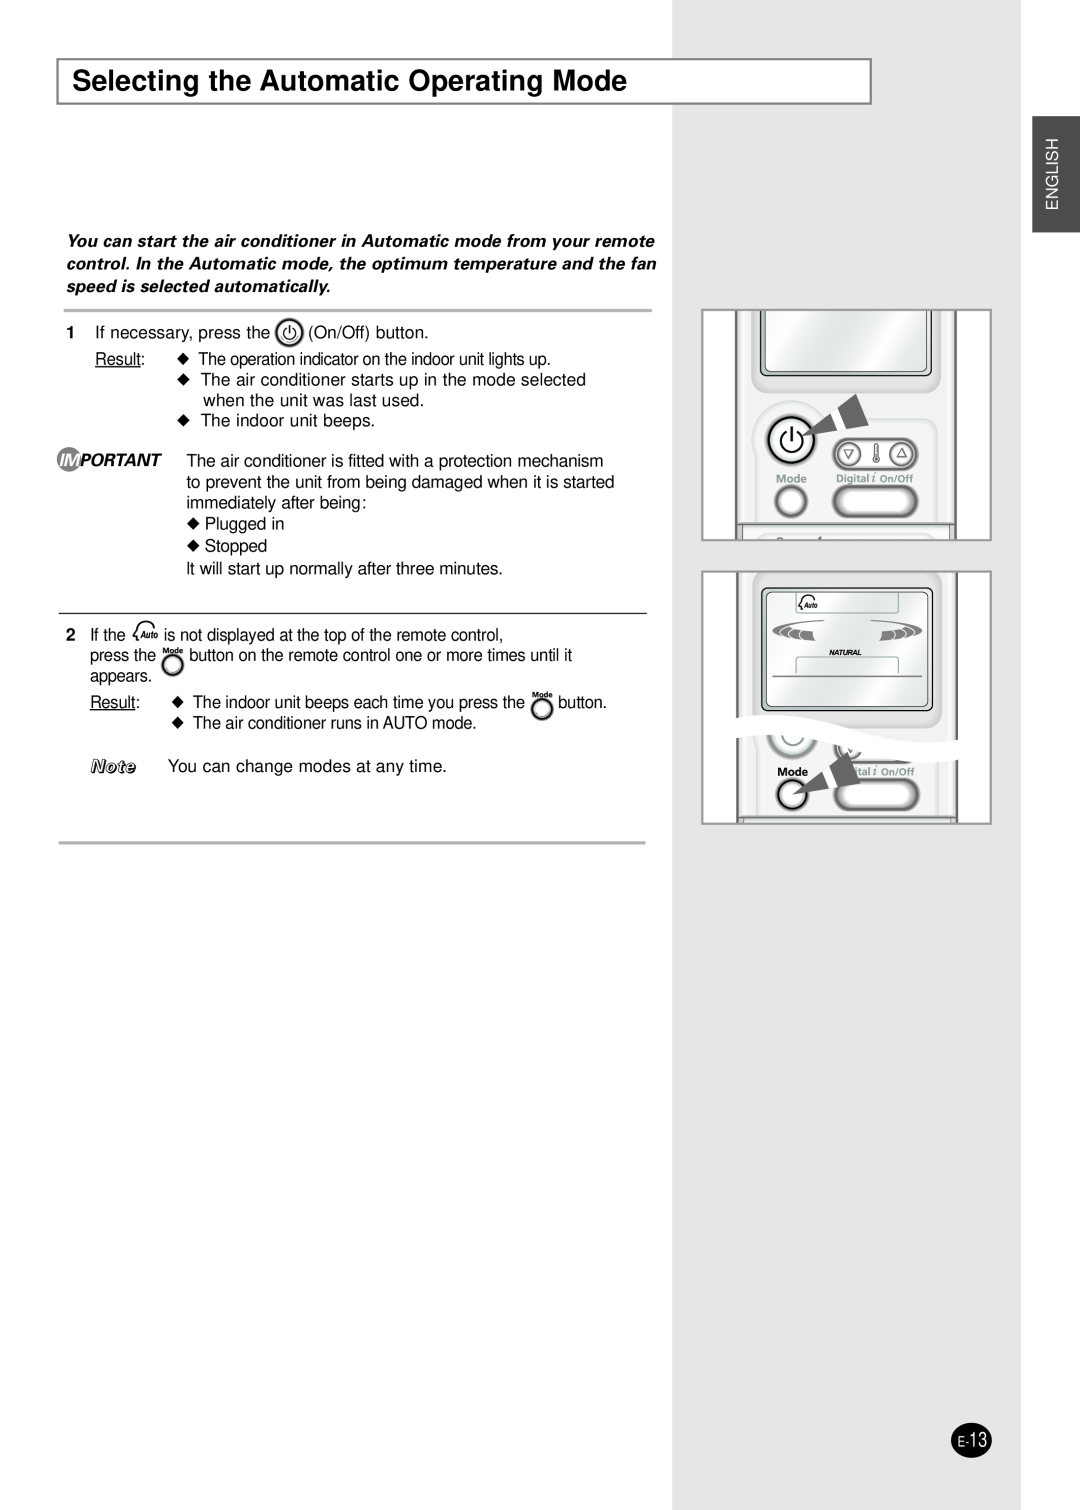 Samsung MH020FPEA, MH052FPEA1, MH026FPEA, MH035FPEA, MH023FPEA user manual Selecting the Automatic Operating Mode, English 